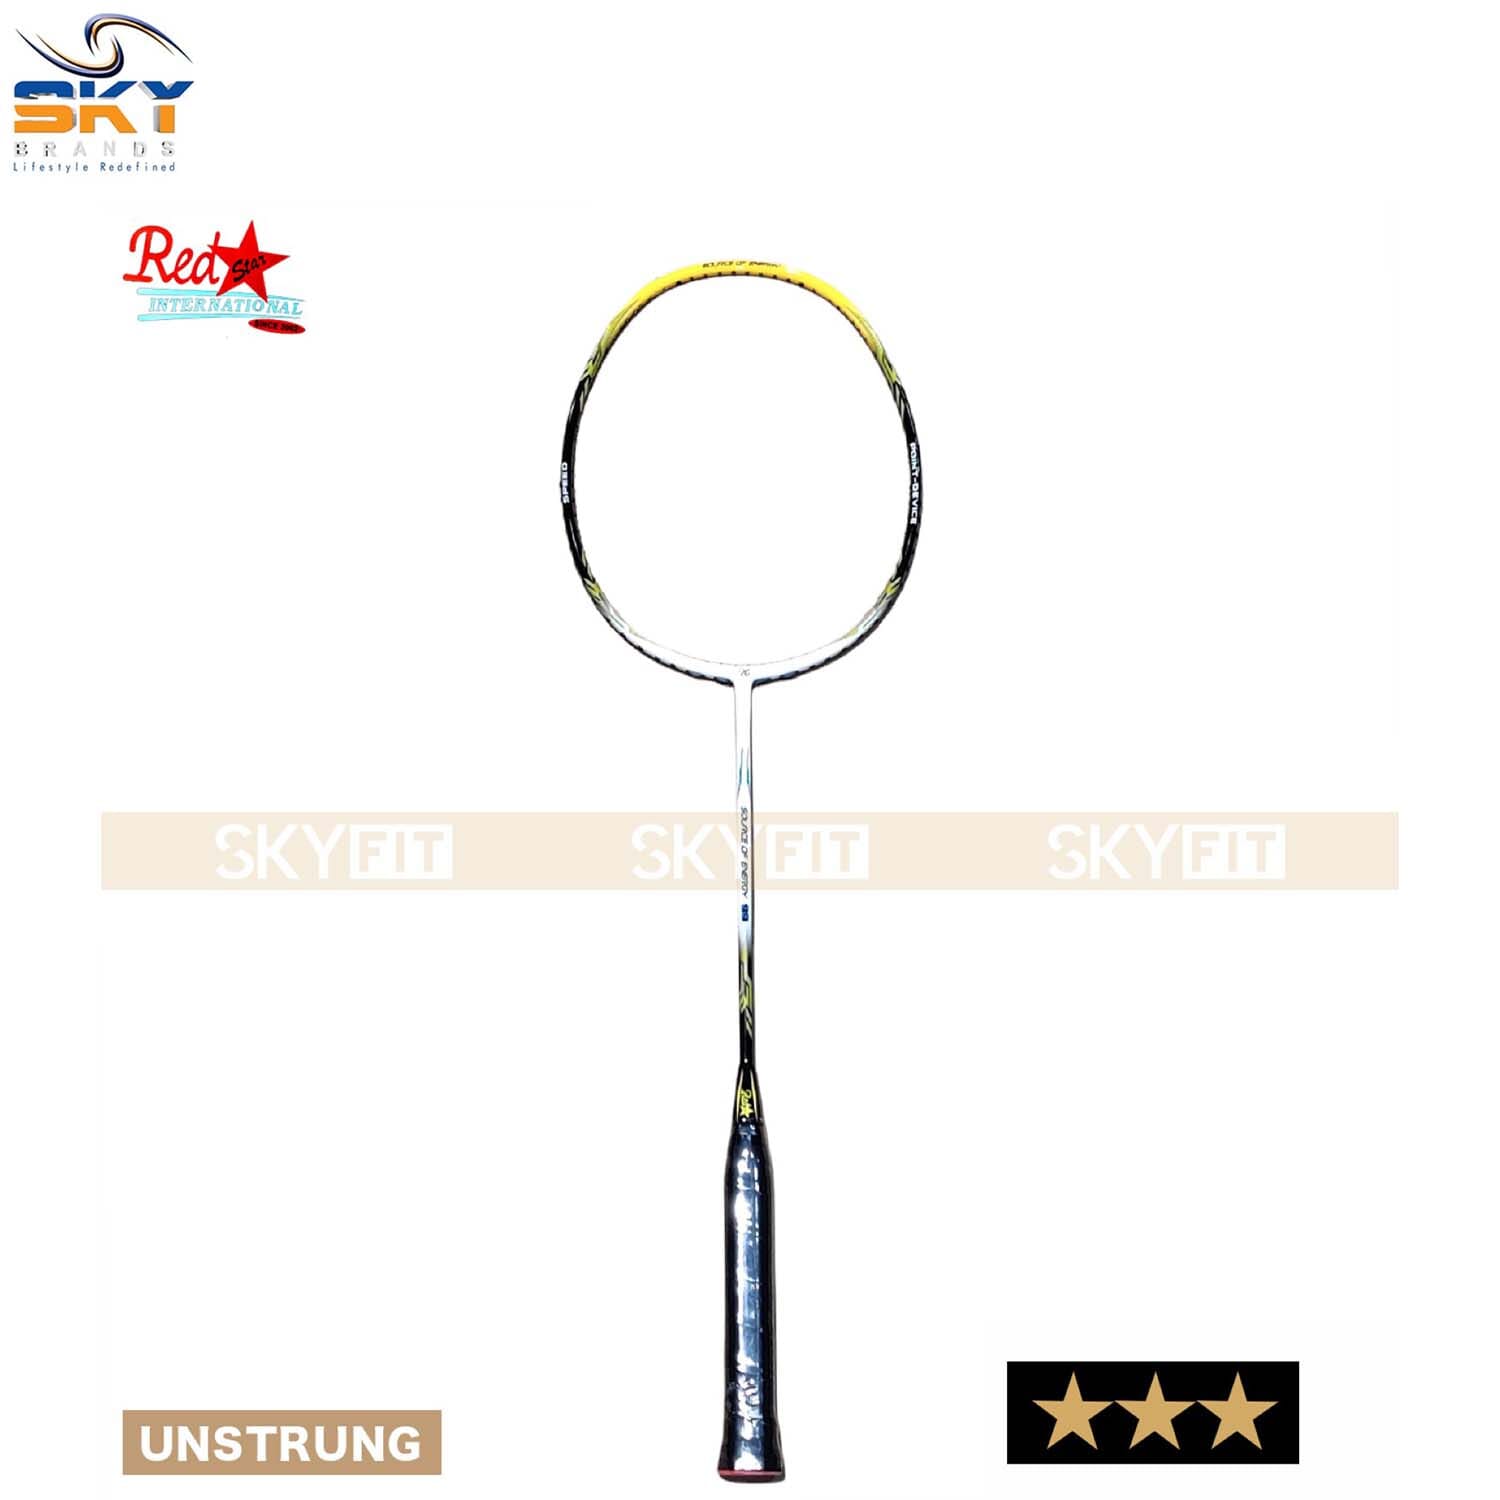 Buy No Brand Rackets at Best Prices Online in Nepal